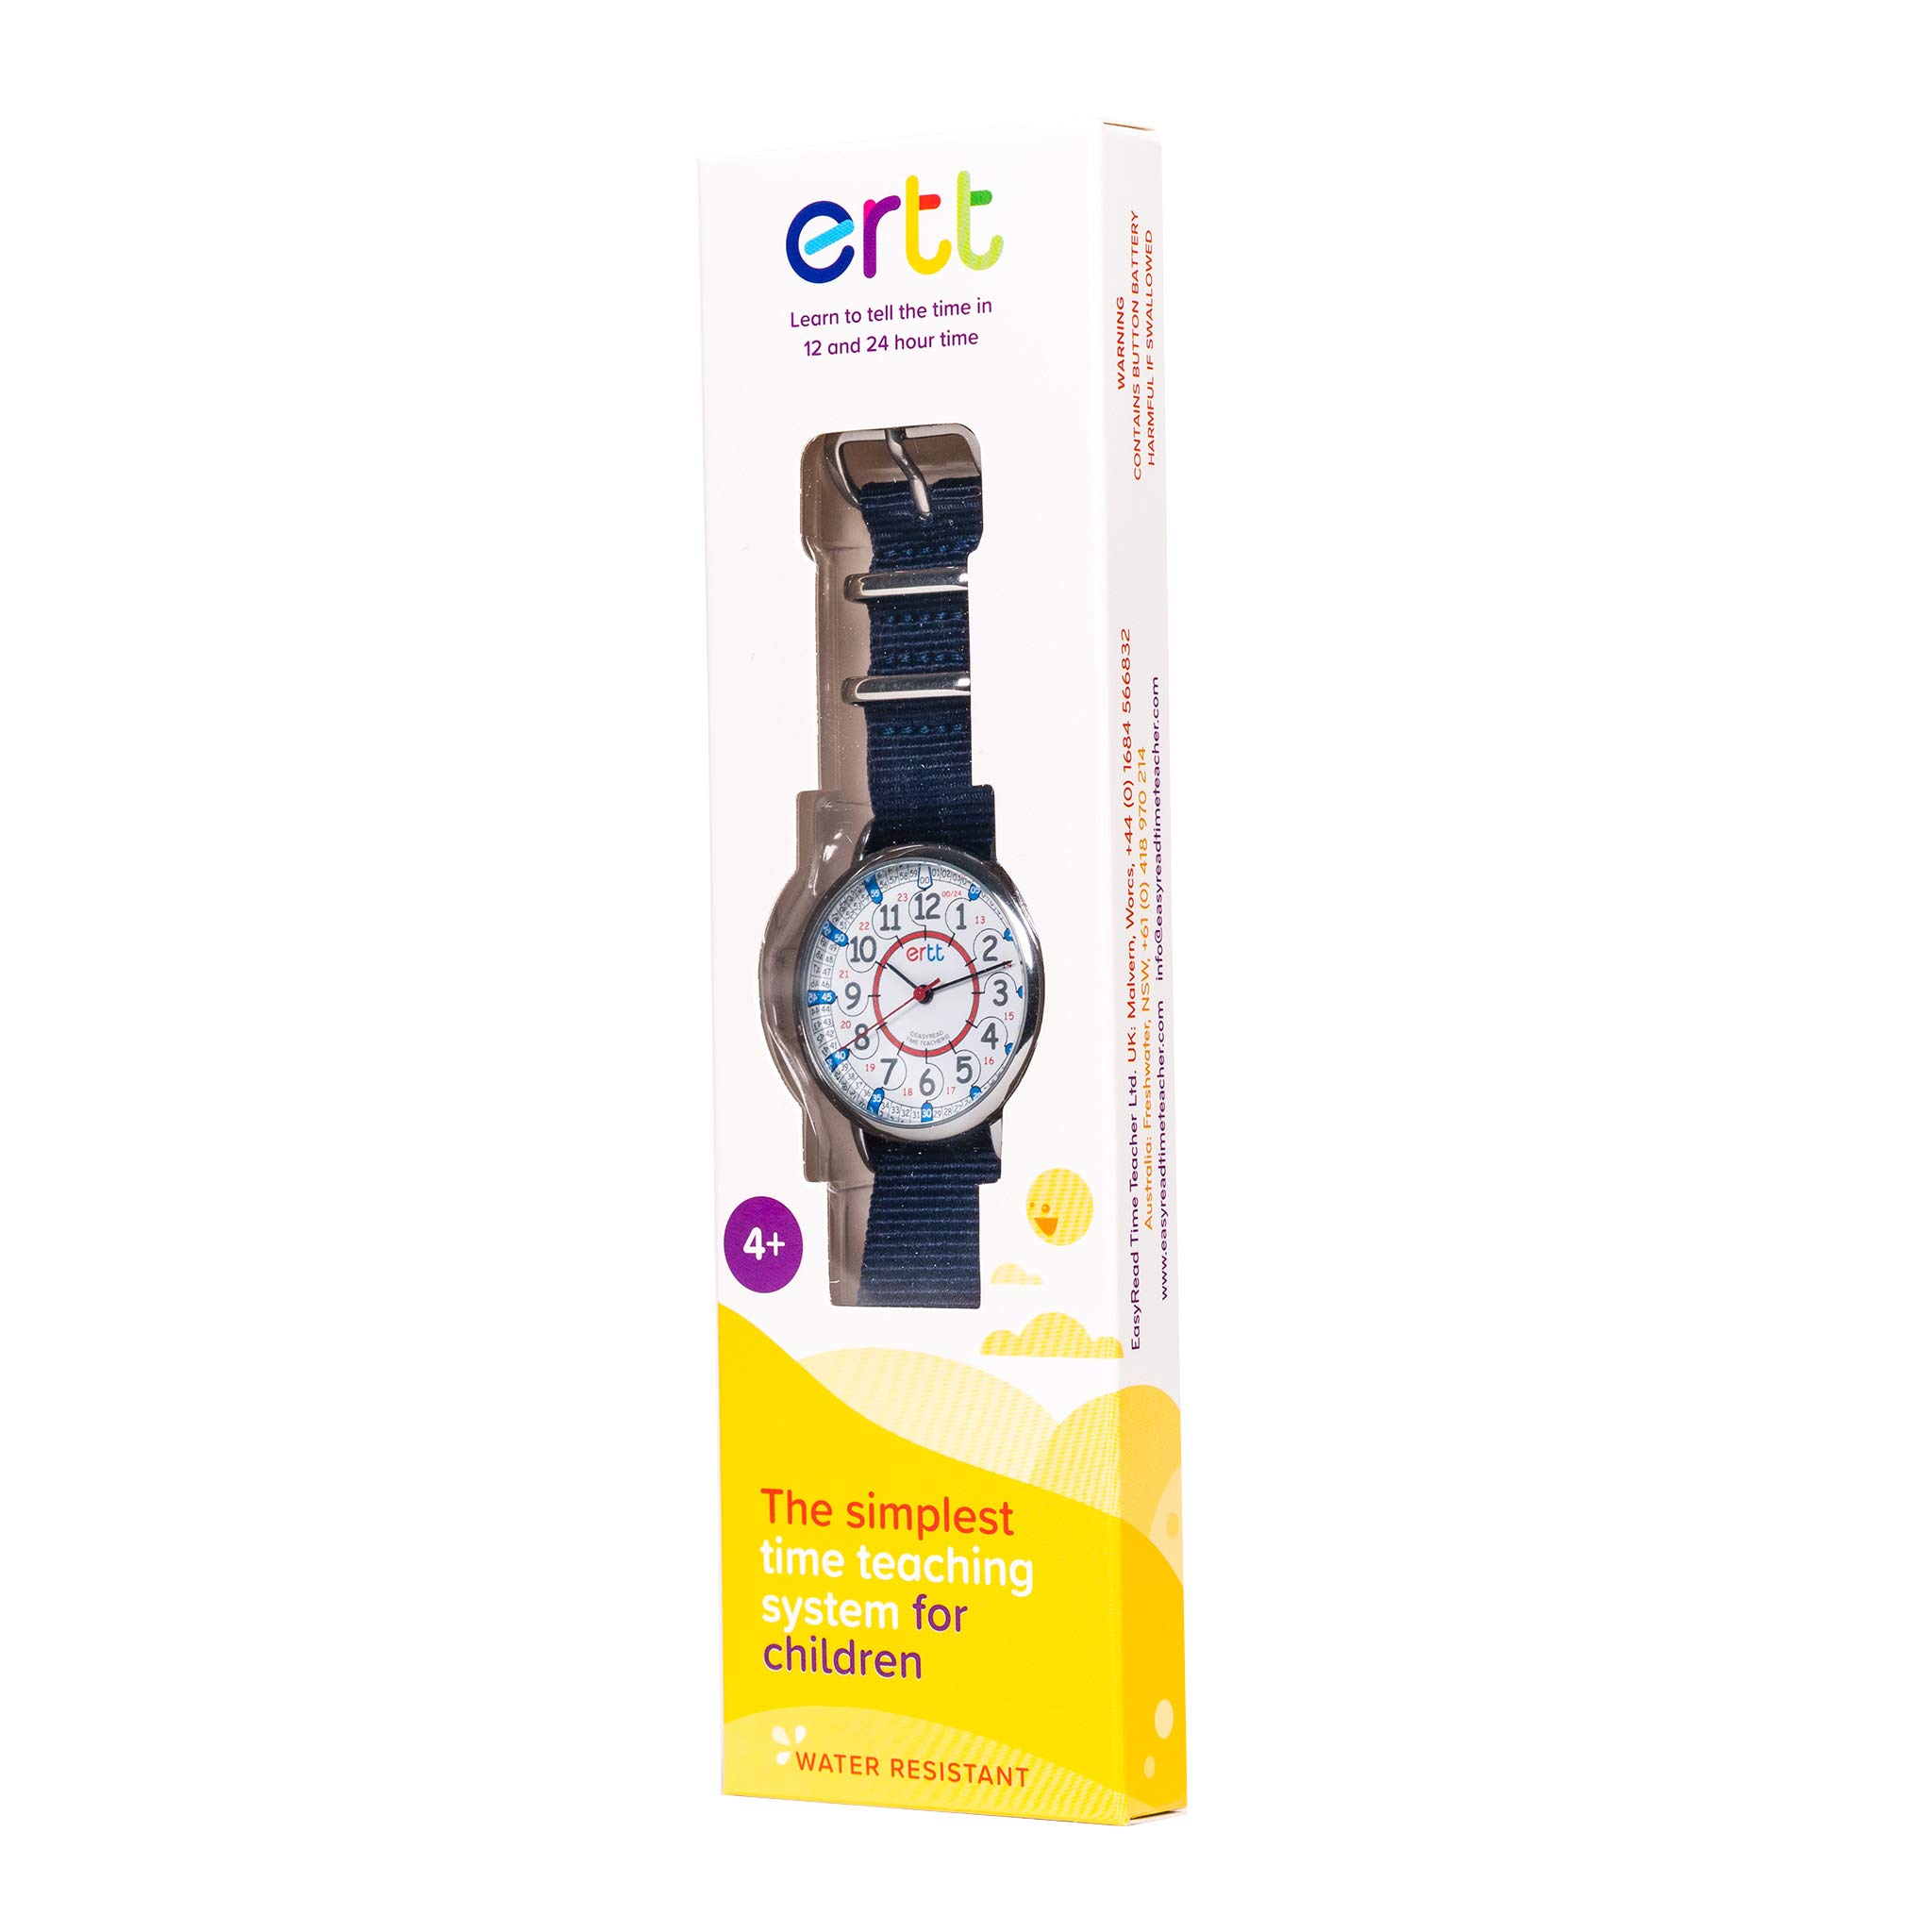 EasyRead Time Teacher Kids Watch - Girls & Boys Watches for Kids - Analog Teaching Watch - Tell The Time Childrens Watch - 2 Step Time Teacher Kids Watch - Easy to Read Dial 12-24 Hr Face